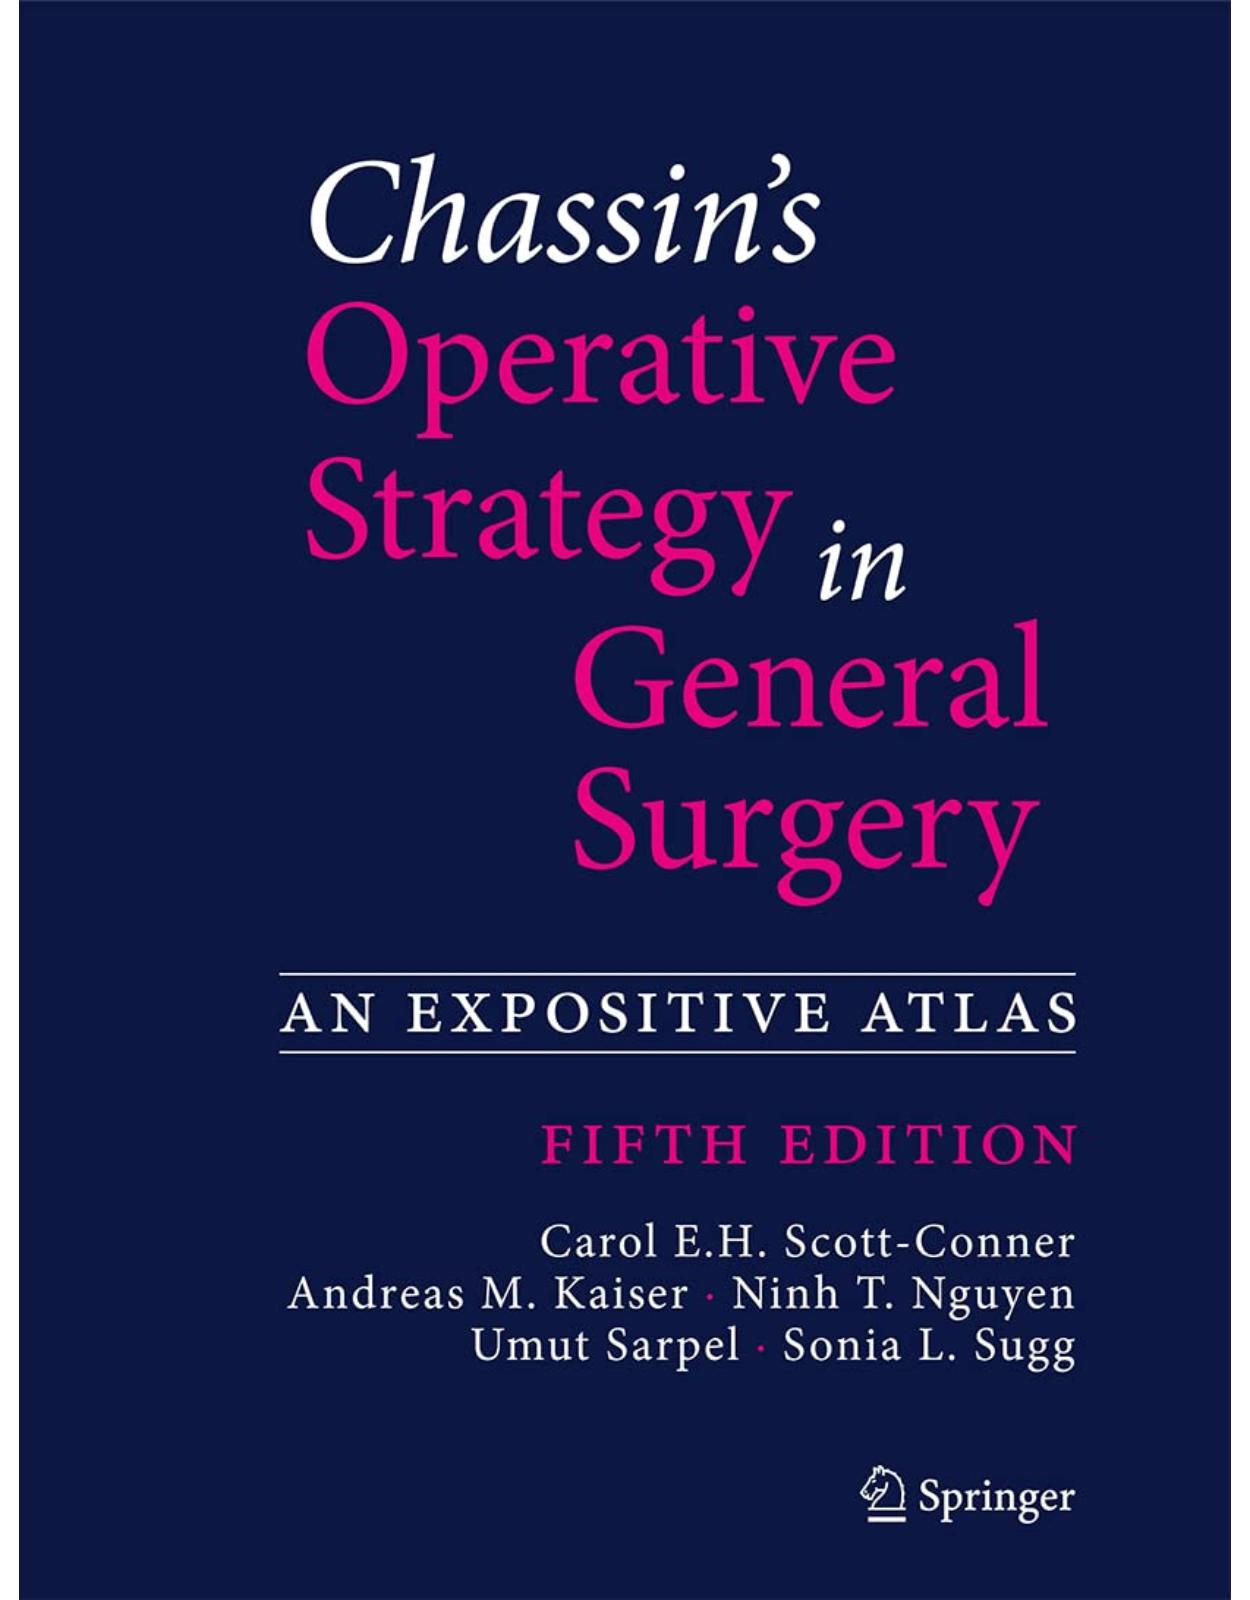 Chassin's Operative Strategy in General Surgery: An Expositive Atlas 